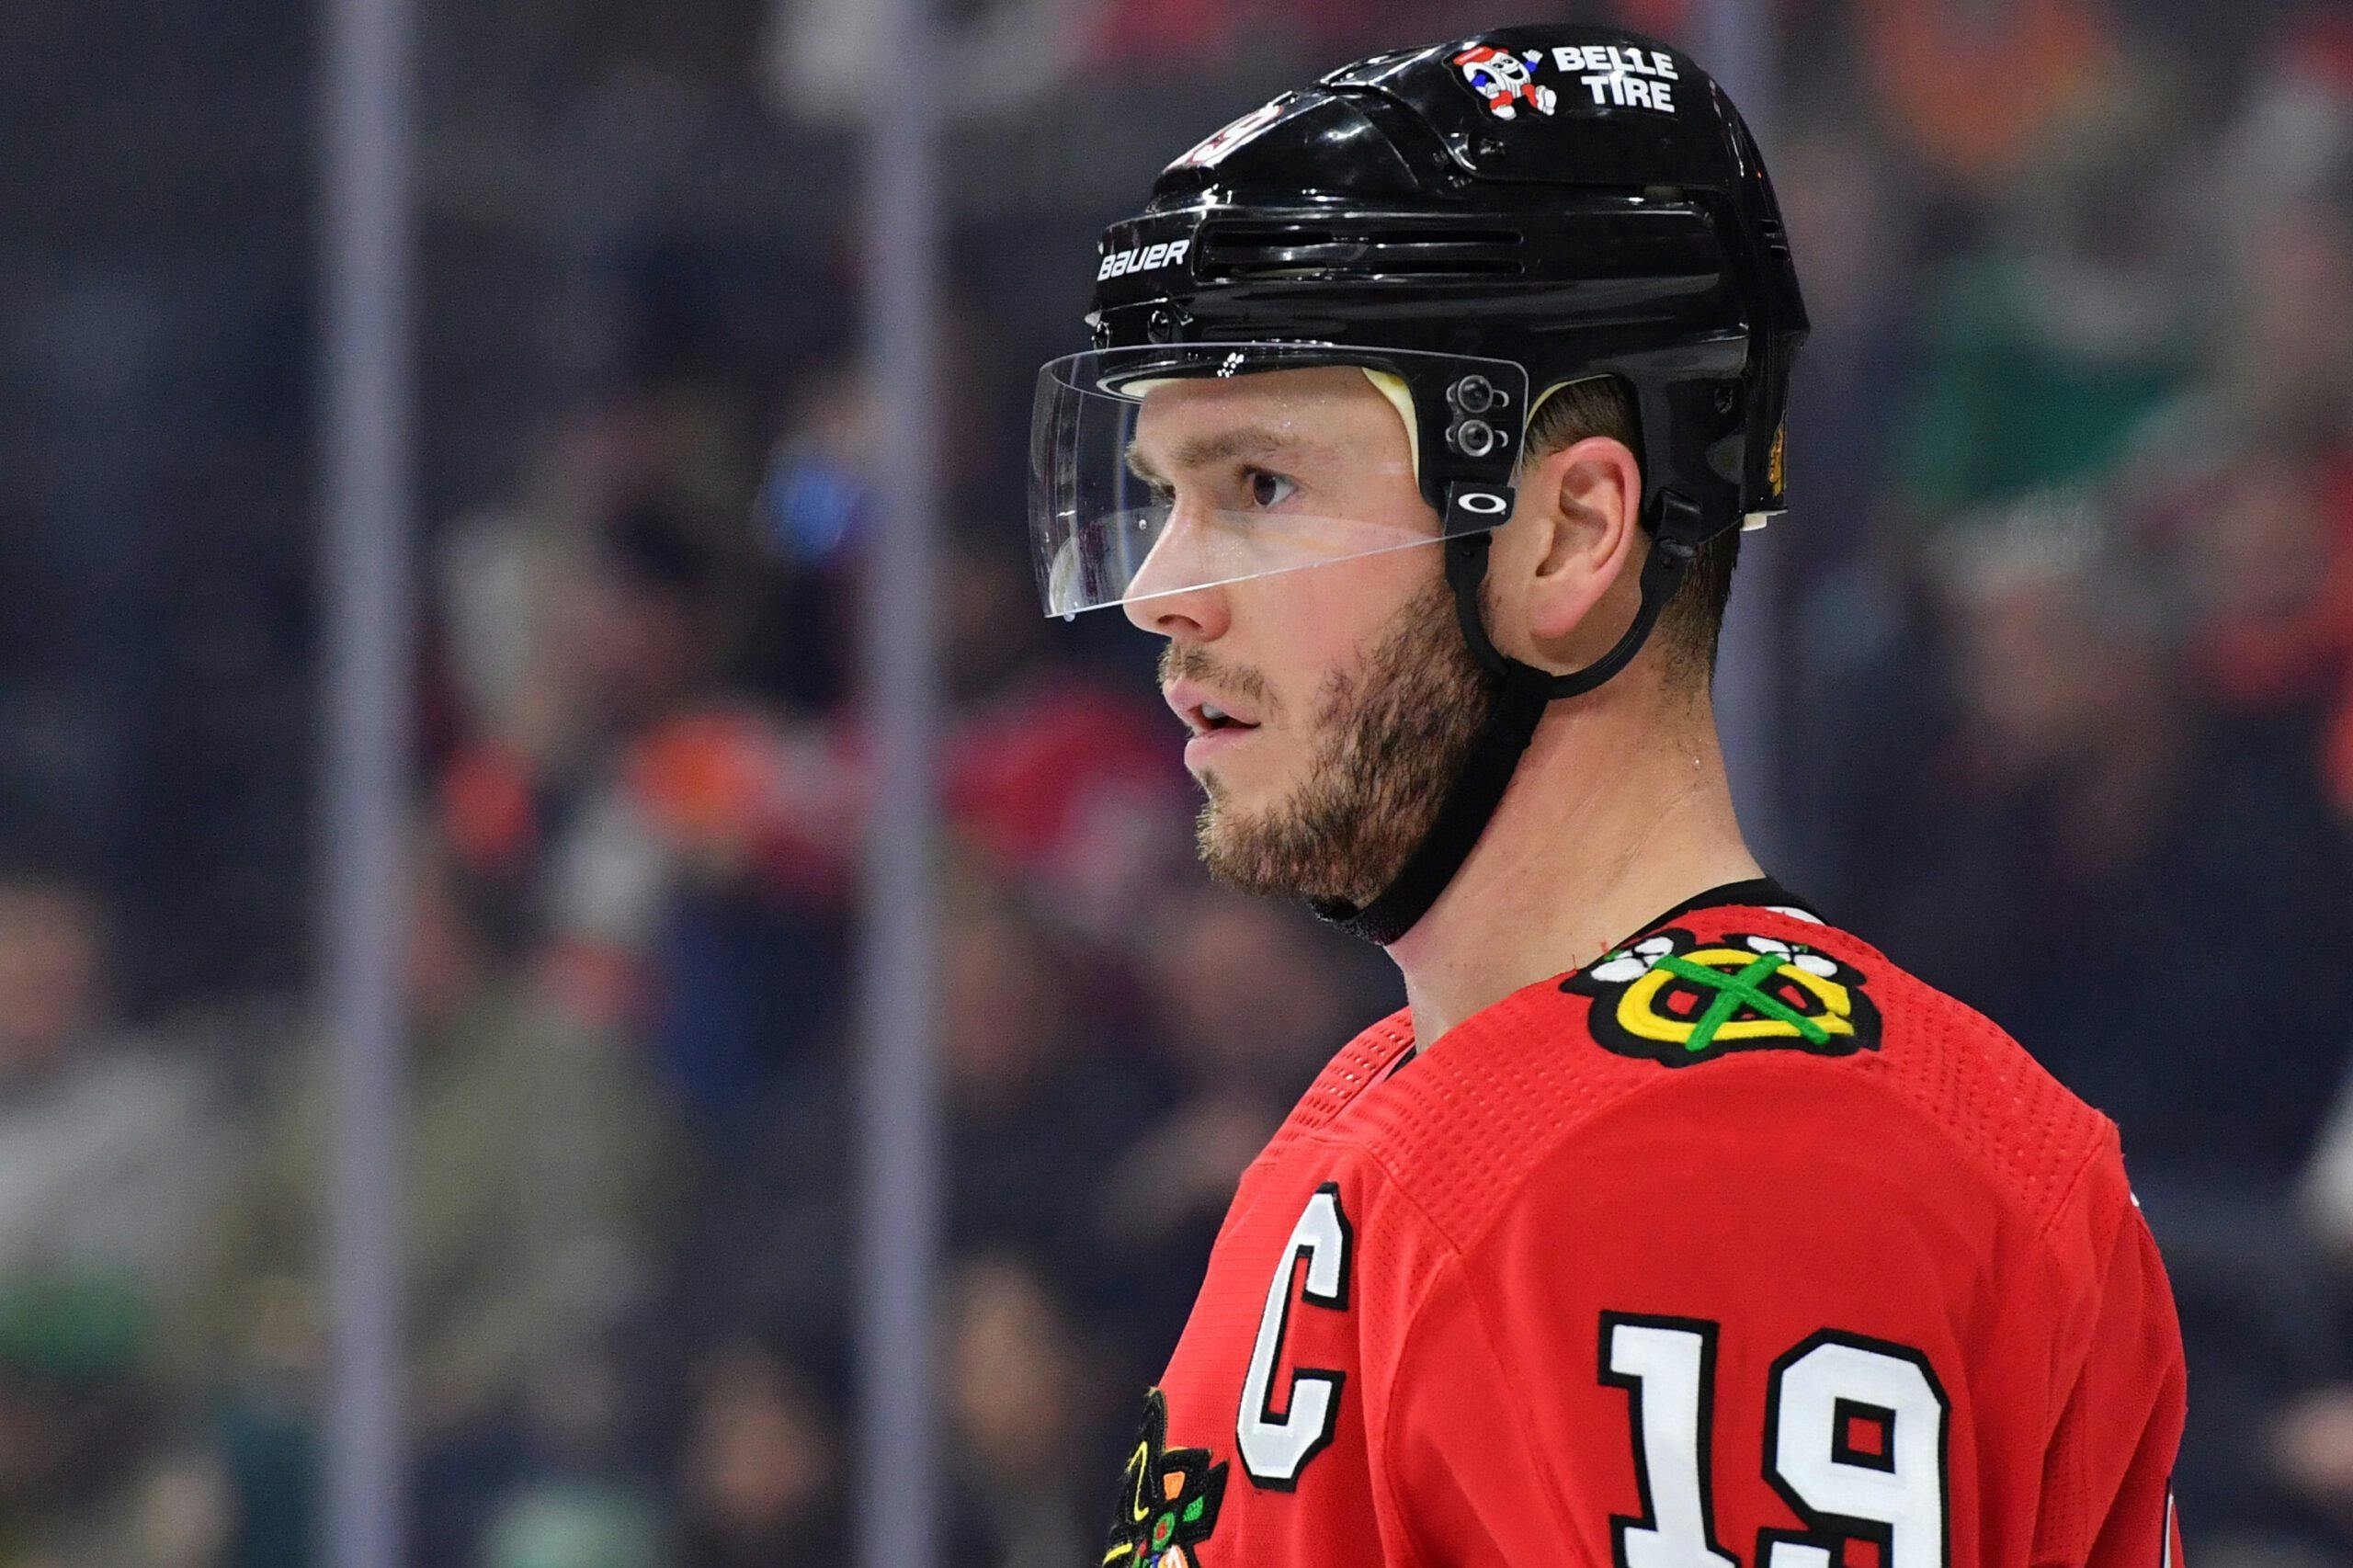 Jonathan Toews set to play final game for the Chicago Blackhawks